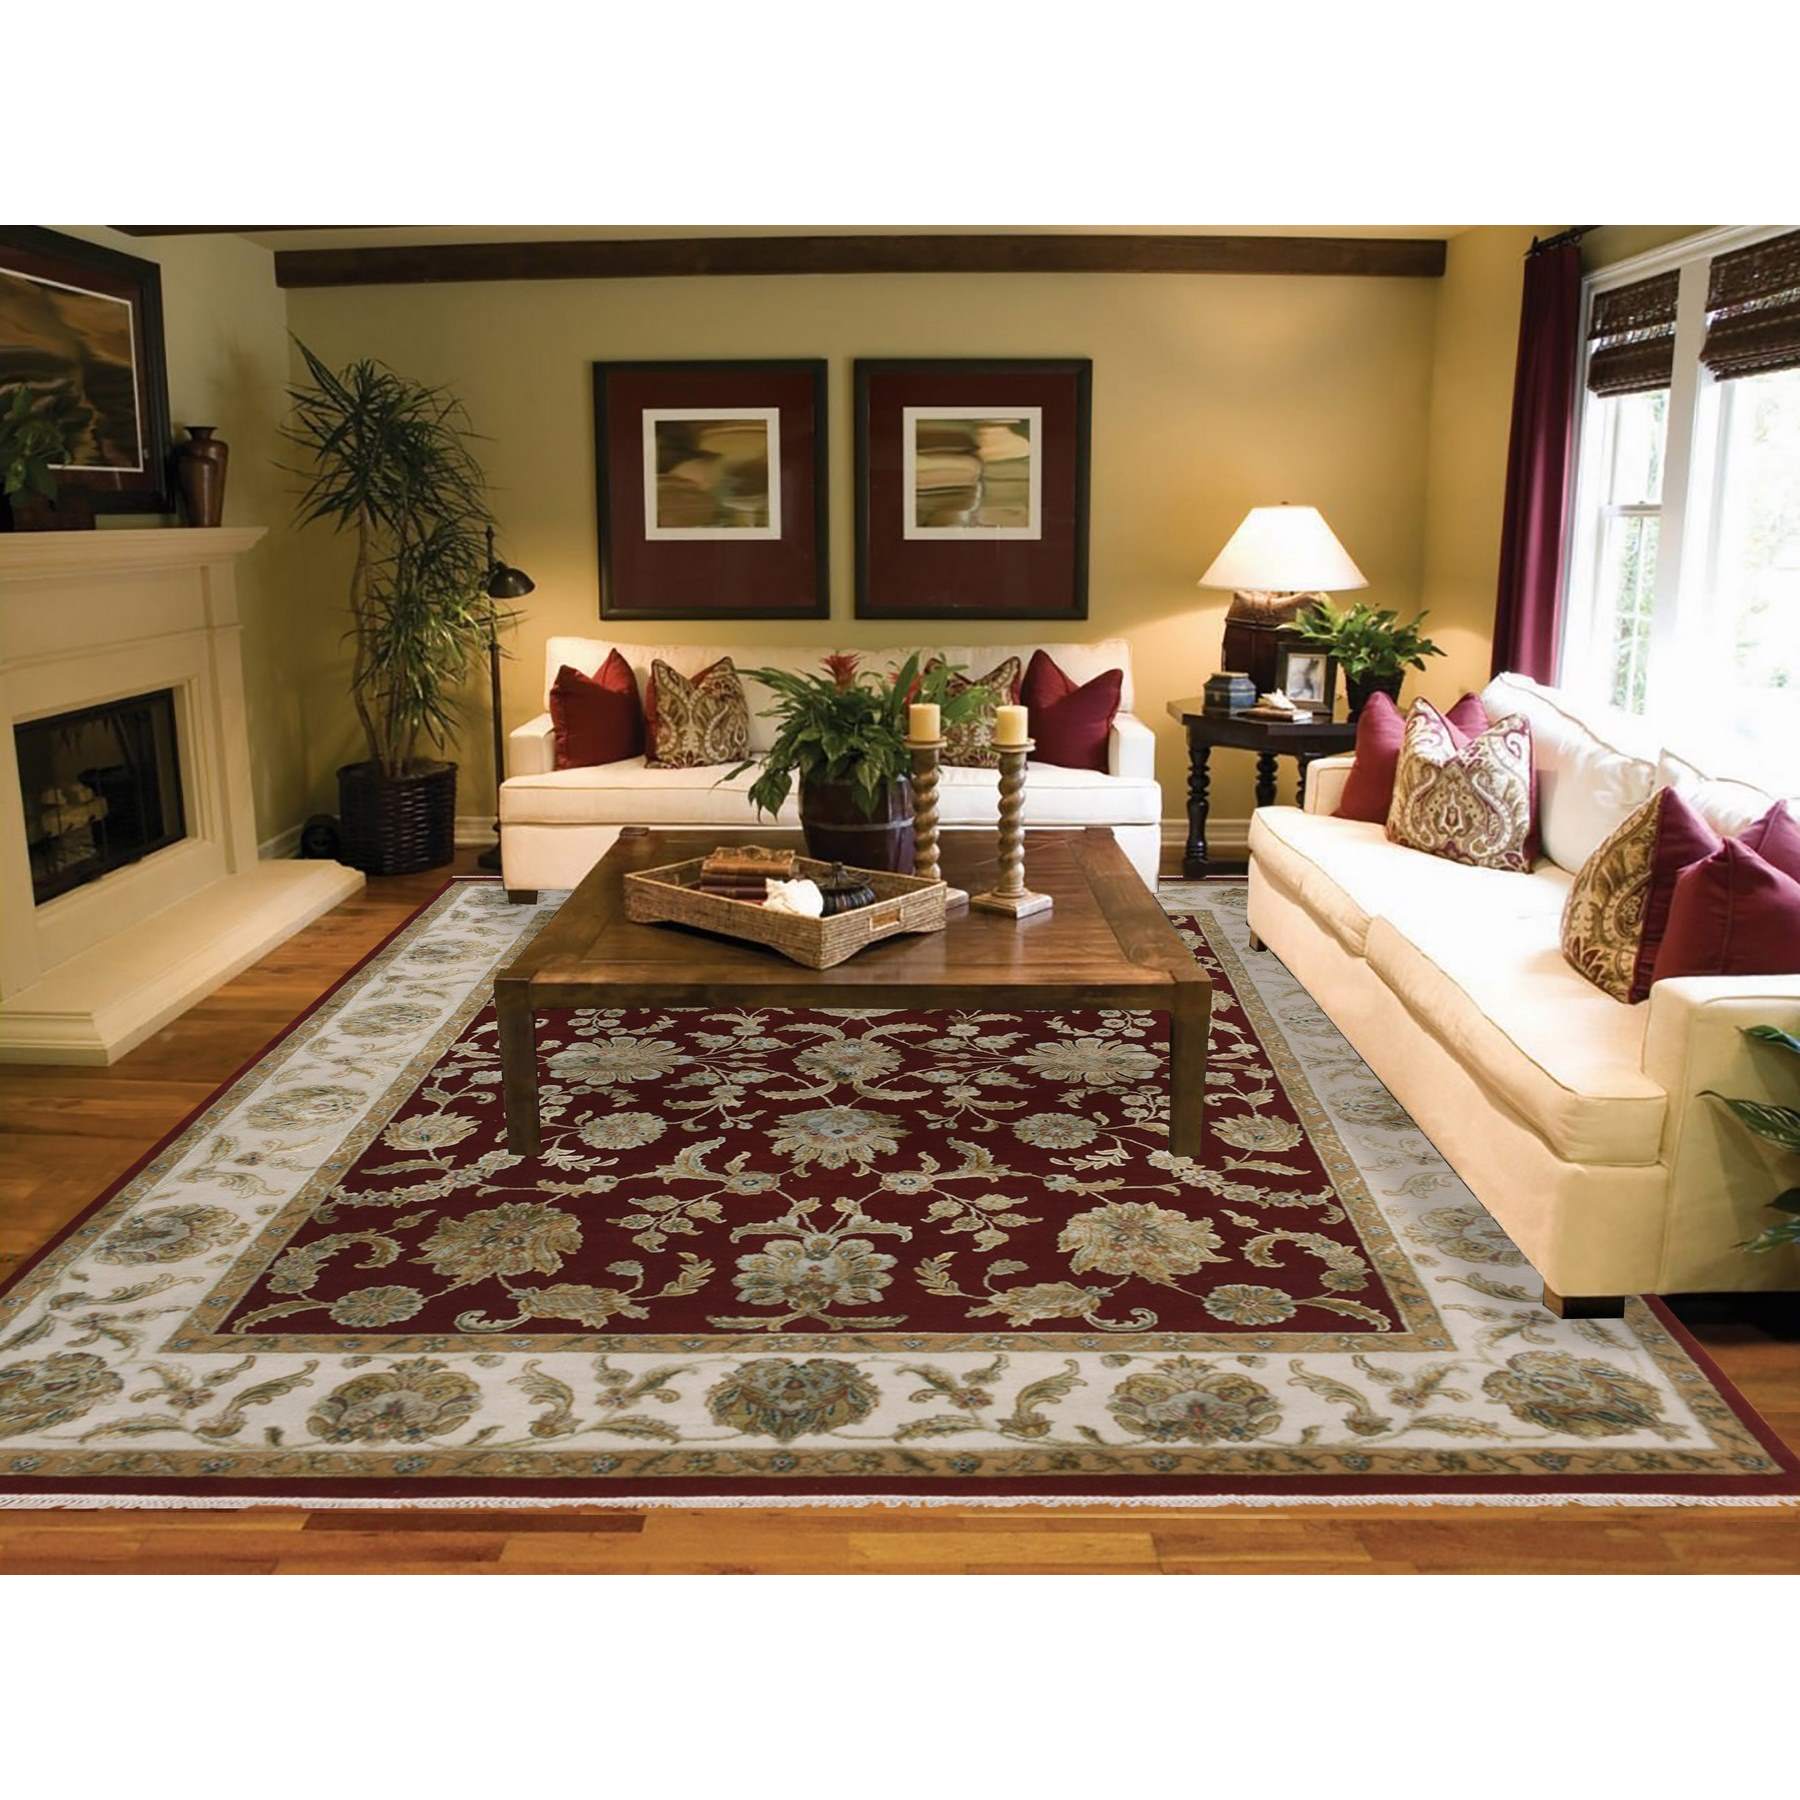 Rajasthan-Hand-Knotted-Rug-376800